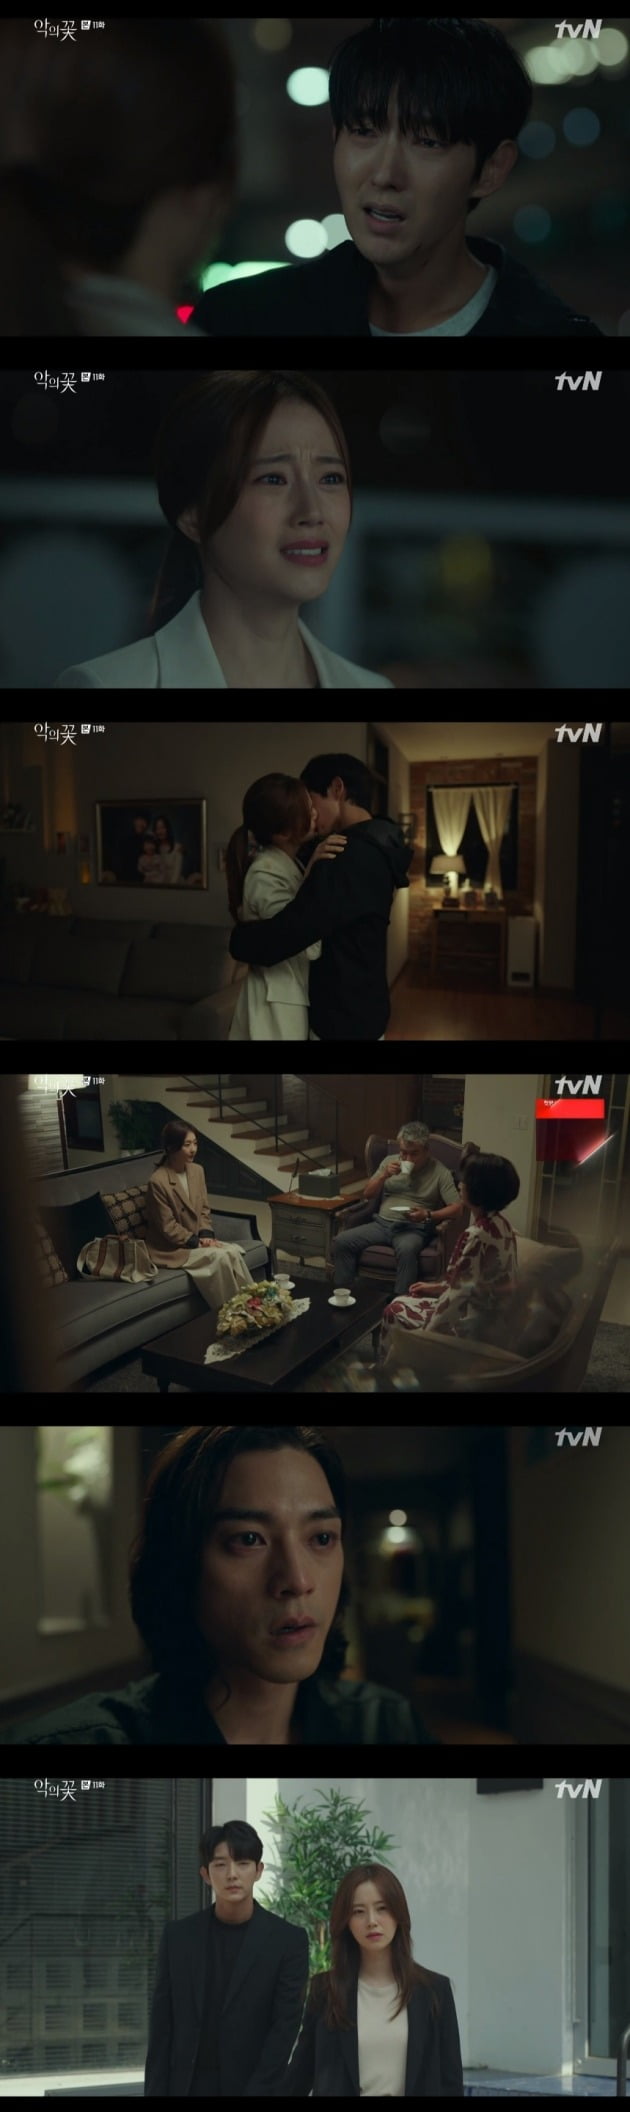 Flower of Evil Lee Joon-gi and Moon Chae-won reaffirmed their love even in the creepy Reversal story.According to Nielsen Korea, the TVN tree drama Flower of Evil, which was broadcast on the last two days, recorded an average of 4.3%, 4.9%, 3.8% and 4.3% of the nationwide households based on paid platforms.Do Hyun-soo (Lee Joon-gi) and Cha JiWon (Moon Chae-won) finally faced the crouched truth.The relationship between the two, who eventually chose to be with each other, was tainted with evil but eventually bloomed with love ().At the same time, the mysterious Baek Hee-Seong (Kim Ji-hoon) was revealed to be an accomplice of Do Min-seok (Choi Byung-mo), and it exploded to Suspense.First, Cha JiWon asked his fellow Detective Choi Jae-seop (Choi Young-joon), who learned the secret of Do Hyun-soo, to prove him with my life and ask for an opportunity to reveal the truth himself.At that time, Do Hyun-soos plan to reveal the Jennifer 8 case accomplice and to work with the police to the human trafficking organization was in crisis when he was caught by the organization boss Yeom Sang-cheol (Kim Ki-moo).Detective Cha JiWon appeared just before Do Hyun-soo was tied up and lost his life, blocking Yeom Sang-cheol and making him sweat more.Do Hyun-soo was more confused by the appearance of Cha JiWon, who knew my identity but let go, but he struggled to avoid the police who were coming soon.Do Hyun-soo, who was running away, understood why Cha JiWon was hurting and was hurt by his eyes, and was overcome with uncontrollable feelings.In the end, Do Hyun-soo, who stood in front of Cha JiWon again, cried for the first time, saying, Im sorry.It was a moment when he felt that no one had told him, but he clearly expressed the feelings that existed in him.Do Hyun-soo asked Cha JiWon for forgiveness, who knew everything but believed, and Cha JiWon, who was shedding tears without rest, also said, I just had to do it.Knowing that they could no longer return to their happy routine, the two hugged each other in silence and kissed each other sadly.In addition, Do Hyun-soo confided in my real life that I had hidden in the meantime, and to Cha JiWon, I love you was a rugged but sincere confession, and it was deeply echoed.On the other hand, the real Baek Hee-seong, who borrowed his identity, was shocked by the fact that he was found to be an accomplice in Jennifer 8.Do Hae-soo (Jang Hee-jin) testified that his left fingernail was exceptionally short, and at the same time, the appearance of Baek Hee-seong, who stopped biting his fingernails, overlapped, and his eyes, flashing with madness and living, made the viewers creepy.In the morning of the incident, Do Hyun-soo and Cha JiWon stood in front of Detective Choi Jae-seop, who came to arrest Do Hyun-soo with their hands tightly held.Now, I wonder if the two people who face a sick love will meet again, and how the narrowing tracker, Baek Hee-seong, will move.Flower of Evil will visit viewers on special broadcast on the 3rd.Flower of Evil Lee Joon-gi, Moon Chae-won to sorry tears to confirm the heart of each other, Journal melodrama Kim Ji-hoon identity Reversal story